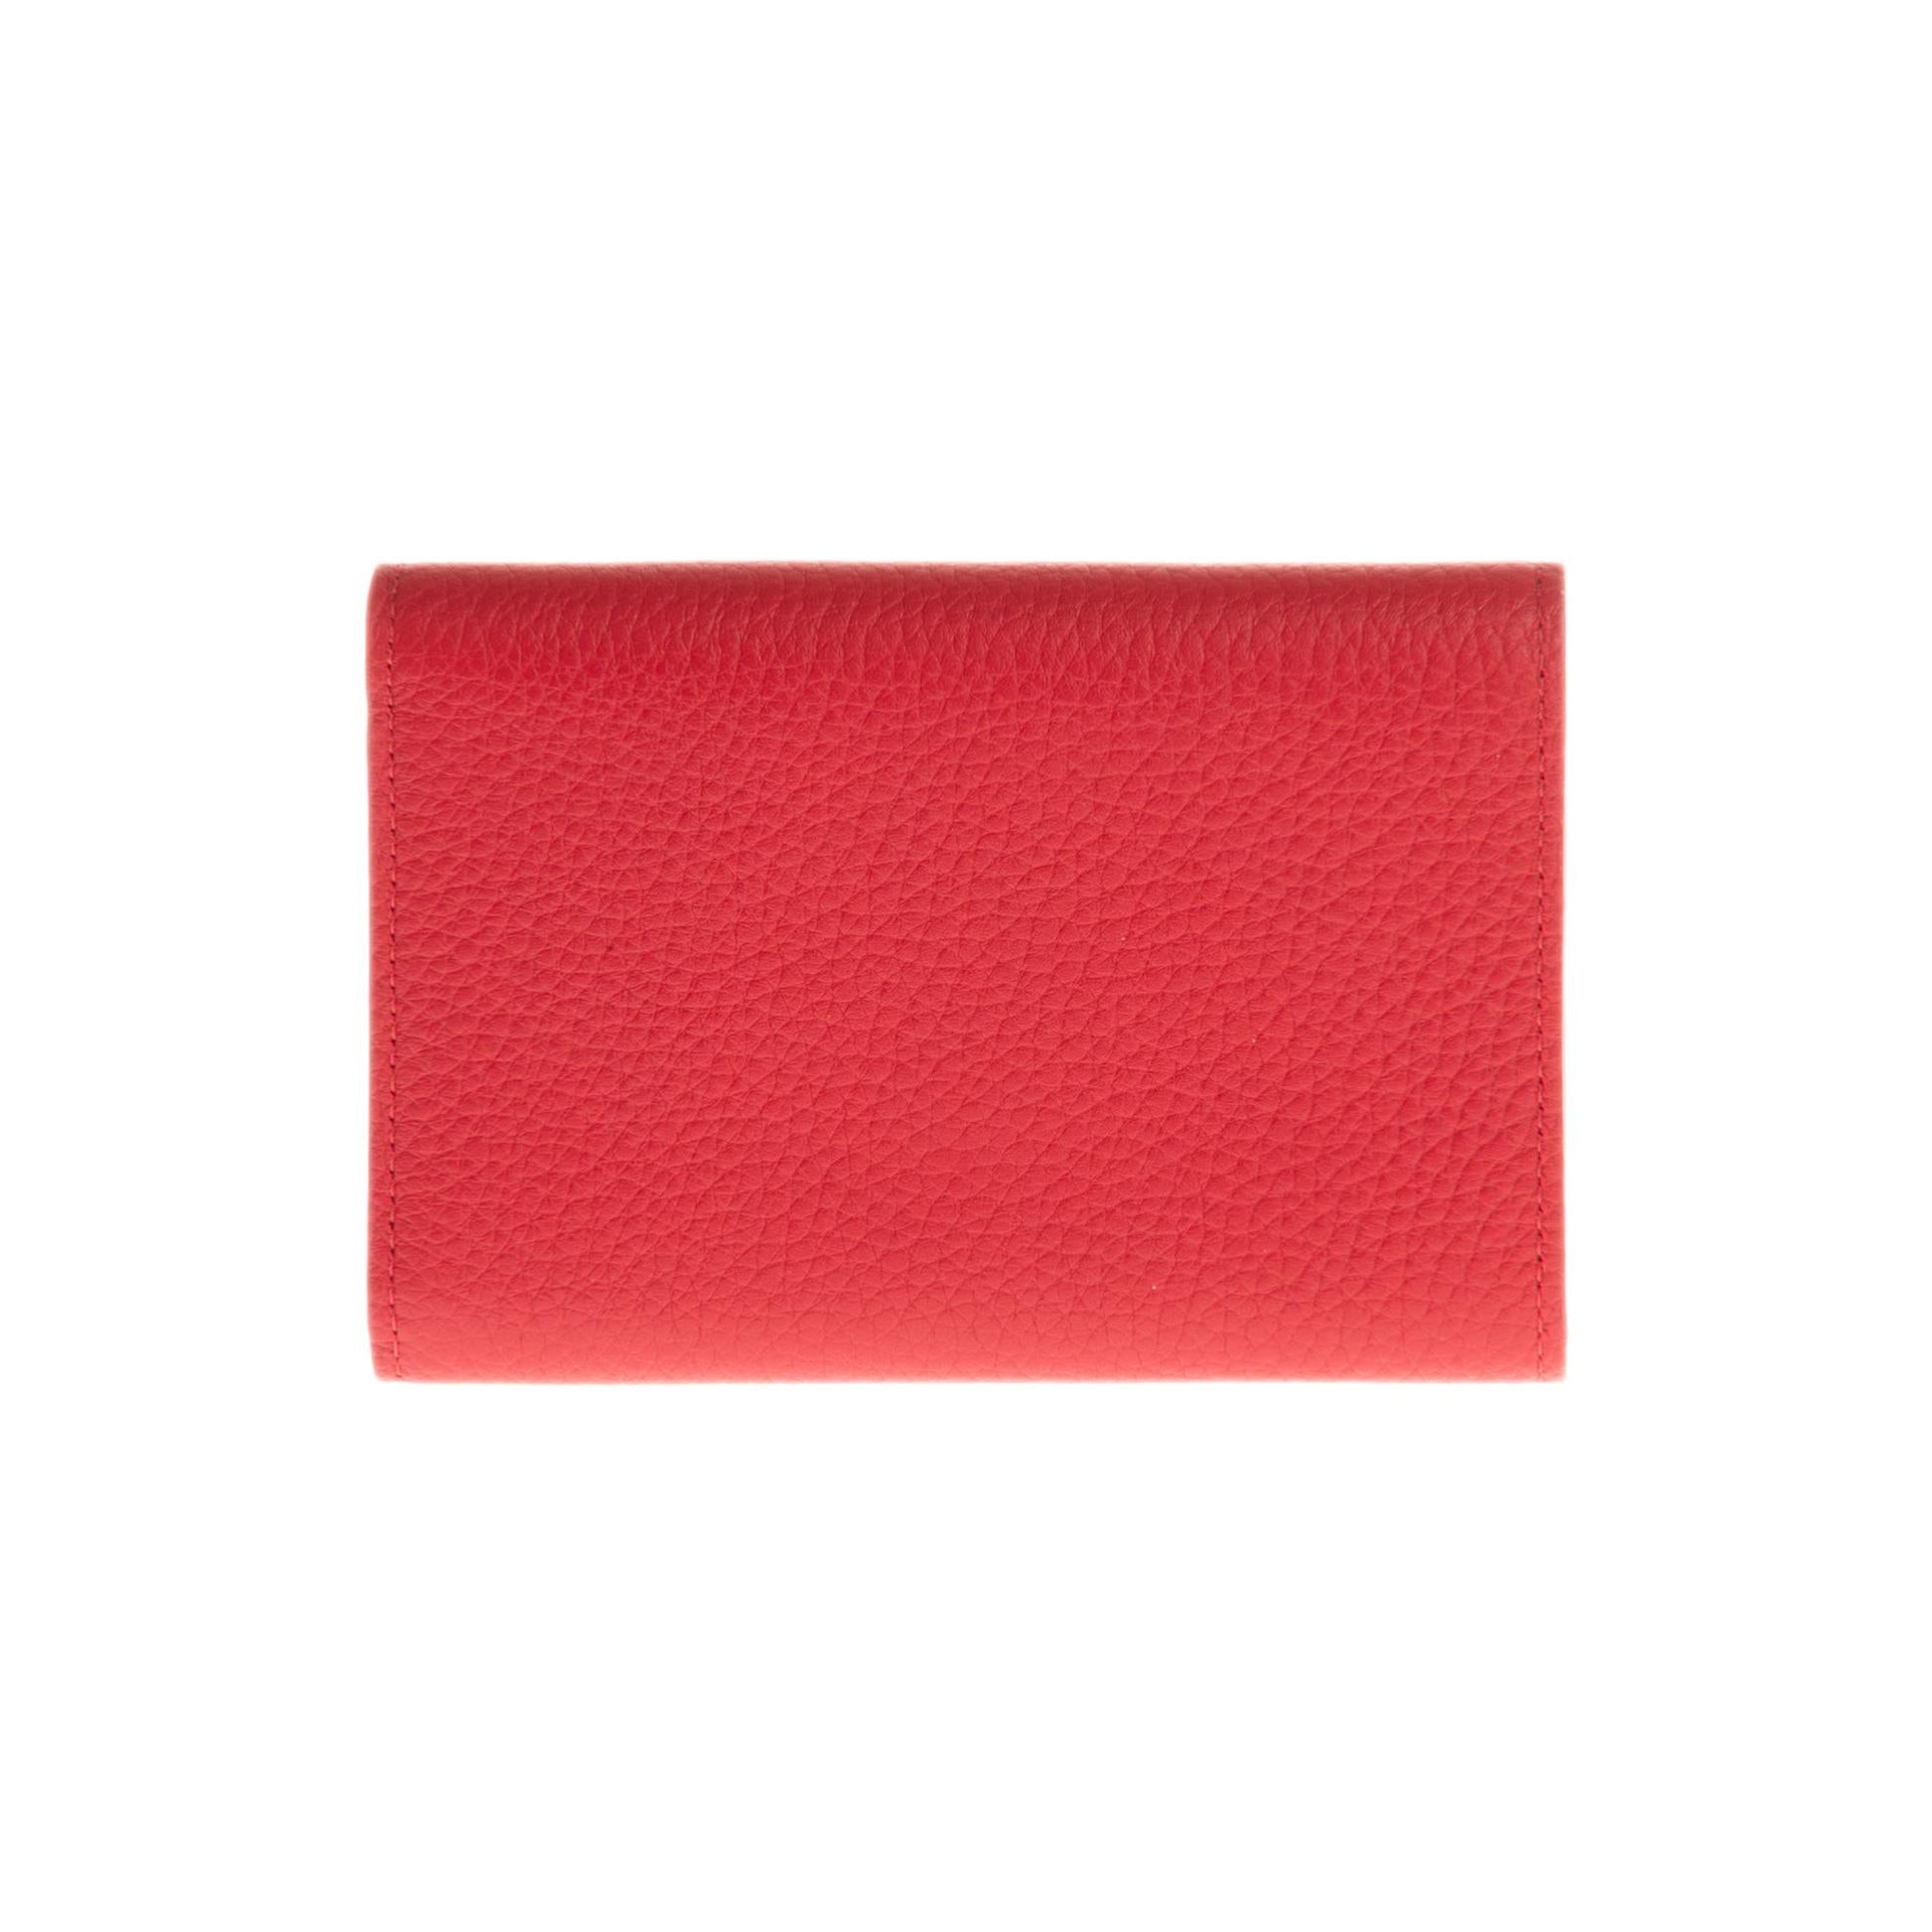 Brand New LV Capucines Compact Wallet in Red ecarlate Taurillon